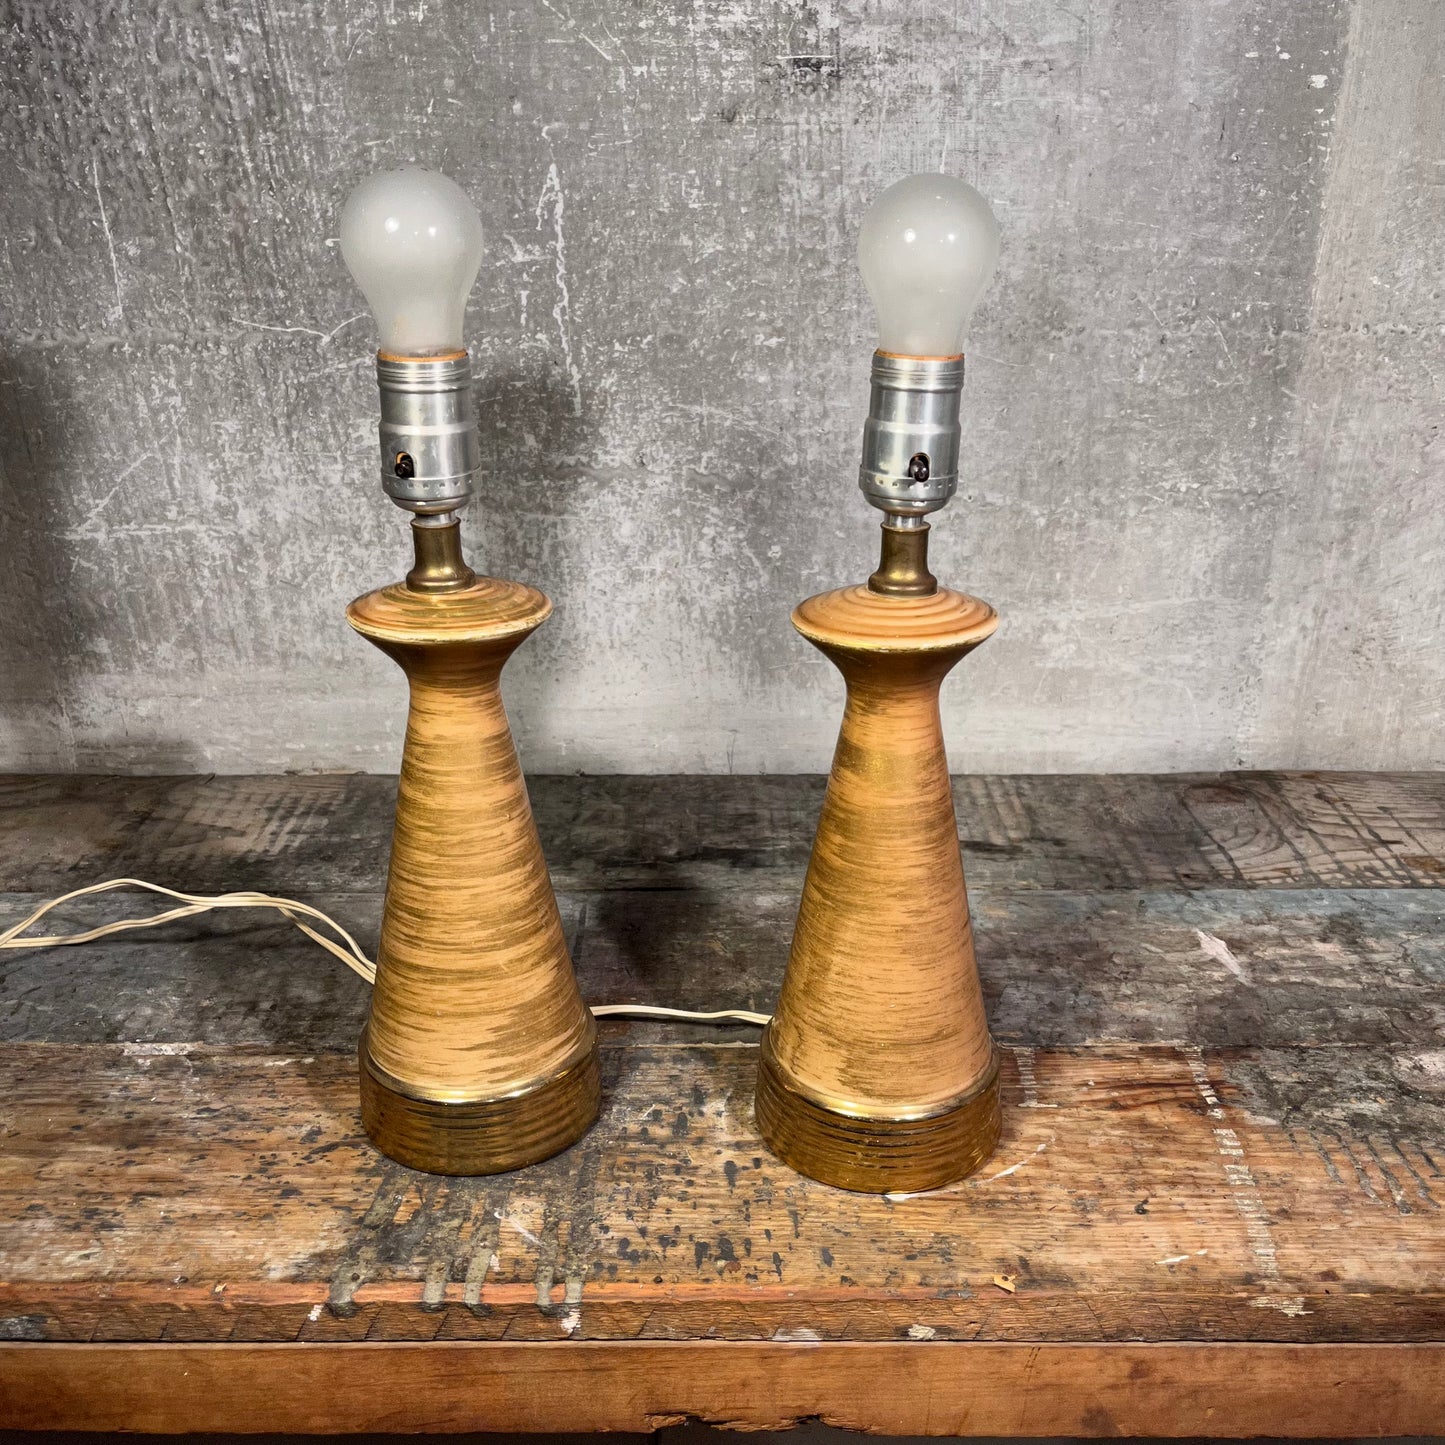 Pair of Unique Gold and Tan Lamps